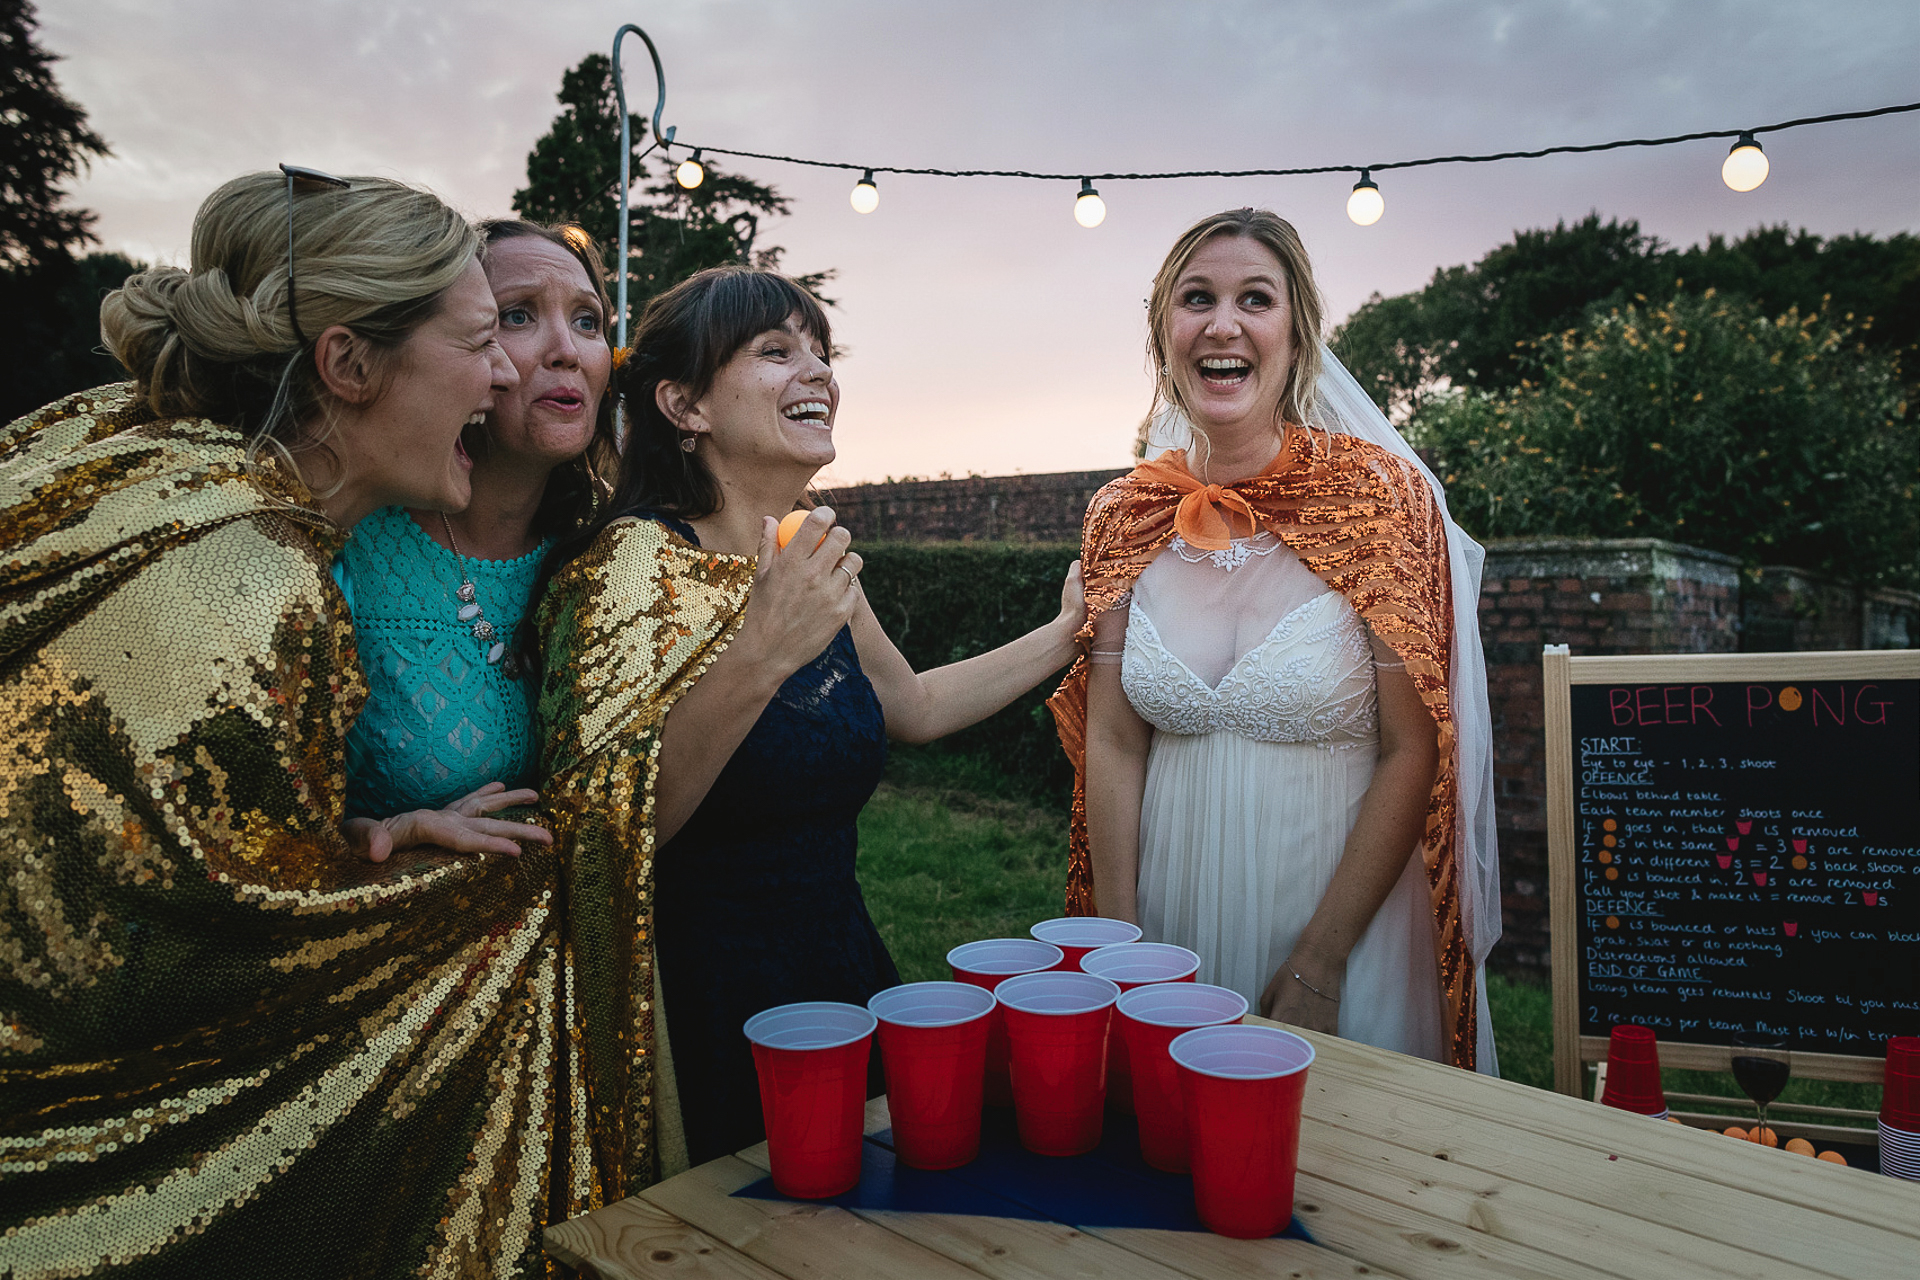 Bride laughing with friends playing beer pong